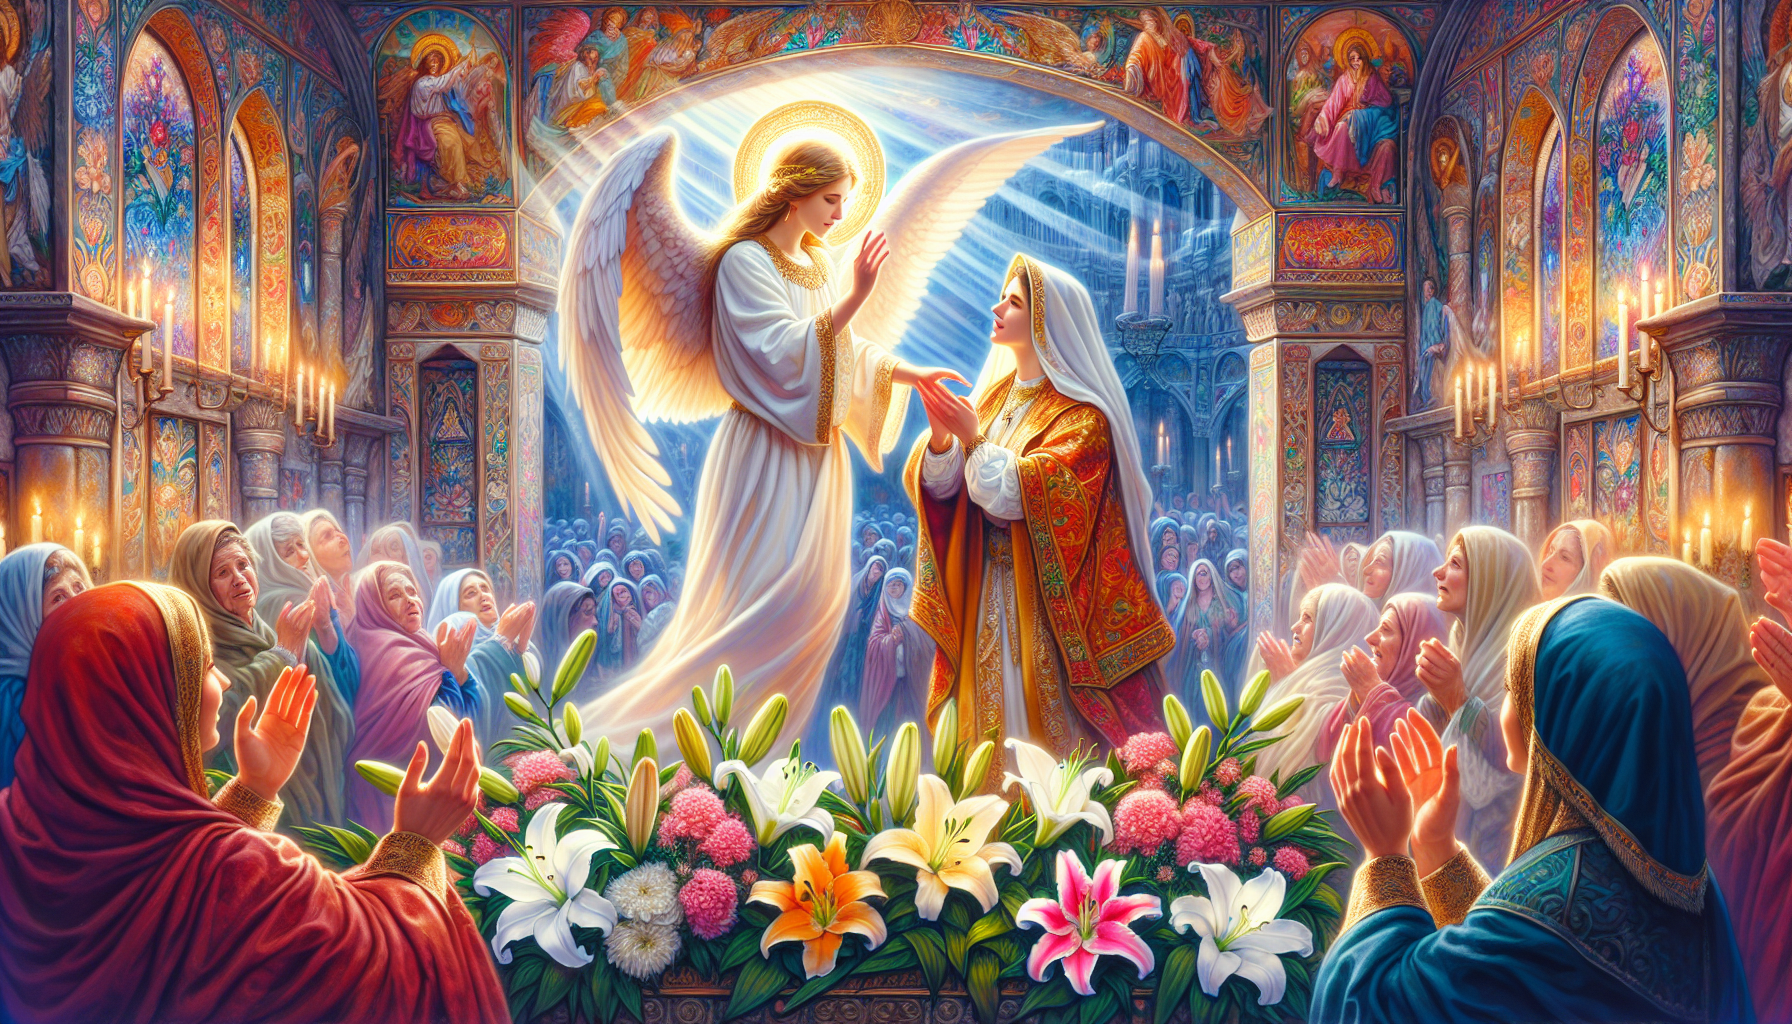 Create an image of a vibrant celebration for the Feast of the Annunciation, featuring an angelic figure (Angel Gabriel) appearing to the Virgin Mary. The scene should be set in a beautifully detailed